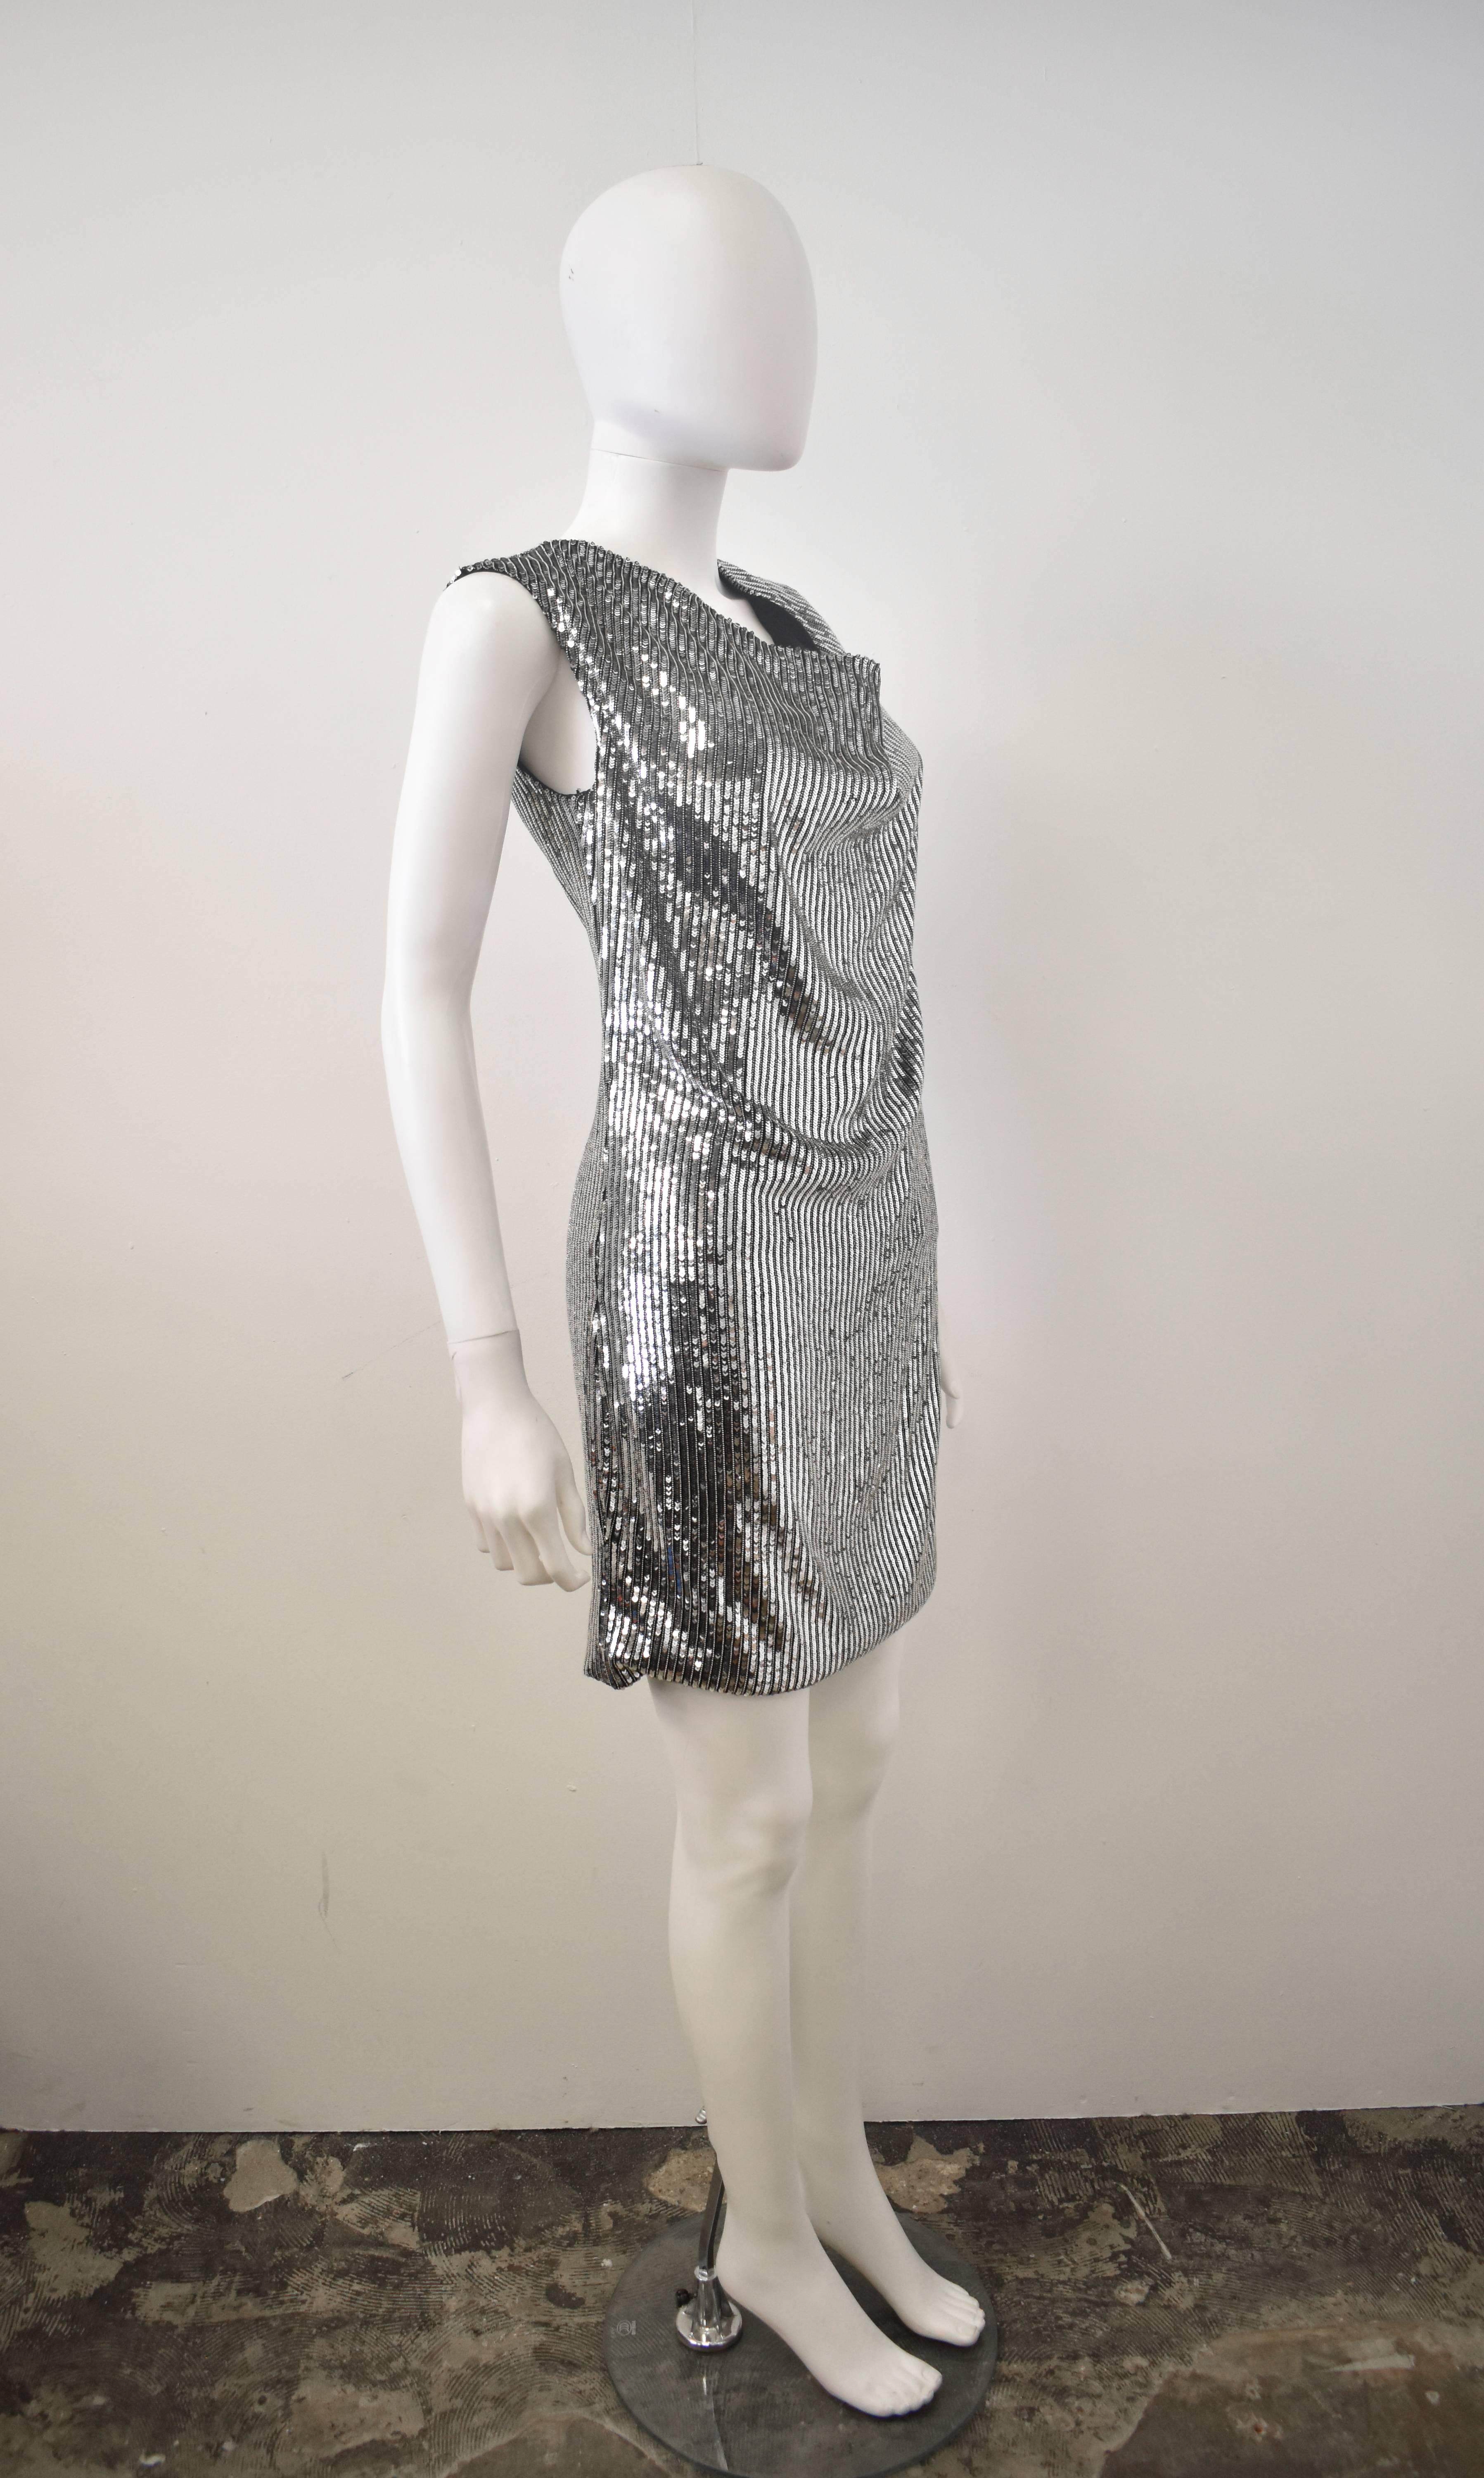 A brand new and unworn Saint Laurent by Hedi Slimane silver sequin and beaded dress. The dress has a simple, sleeveless, straight shape, with a short skirt length and a cowl draped neckline. The dress is made from 100% silk with silver sequin and